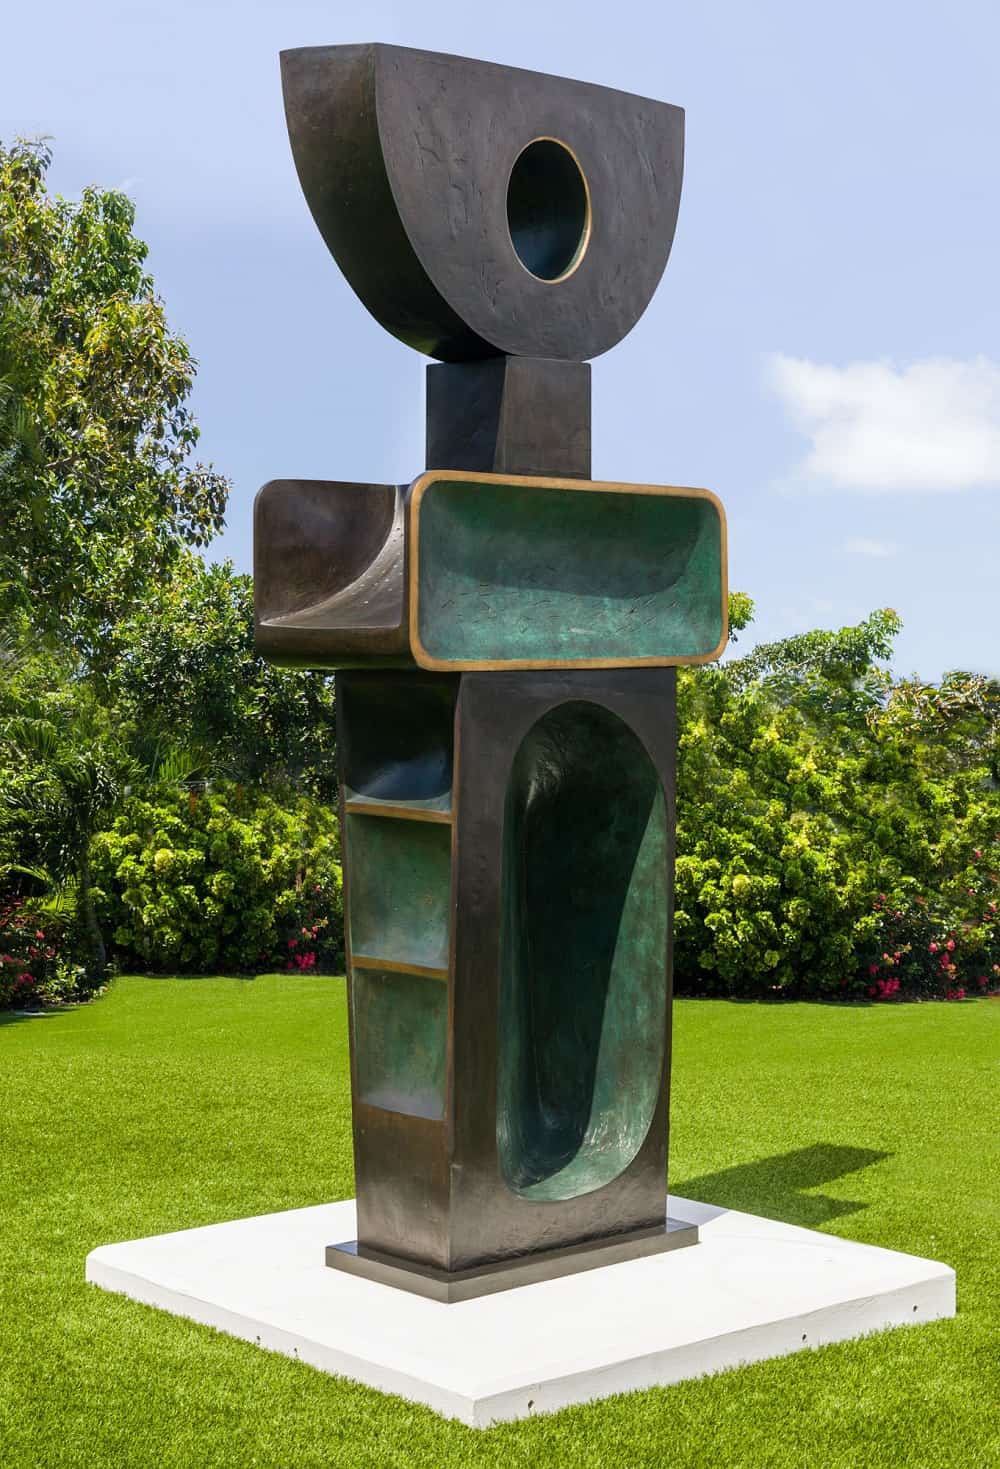 Dame Barbara Hepworth (1903-1975), The Family Of Man (Ultimate Form)